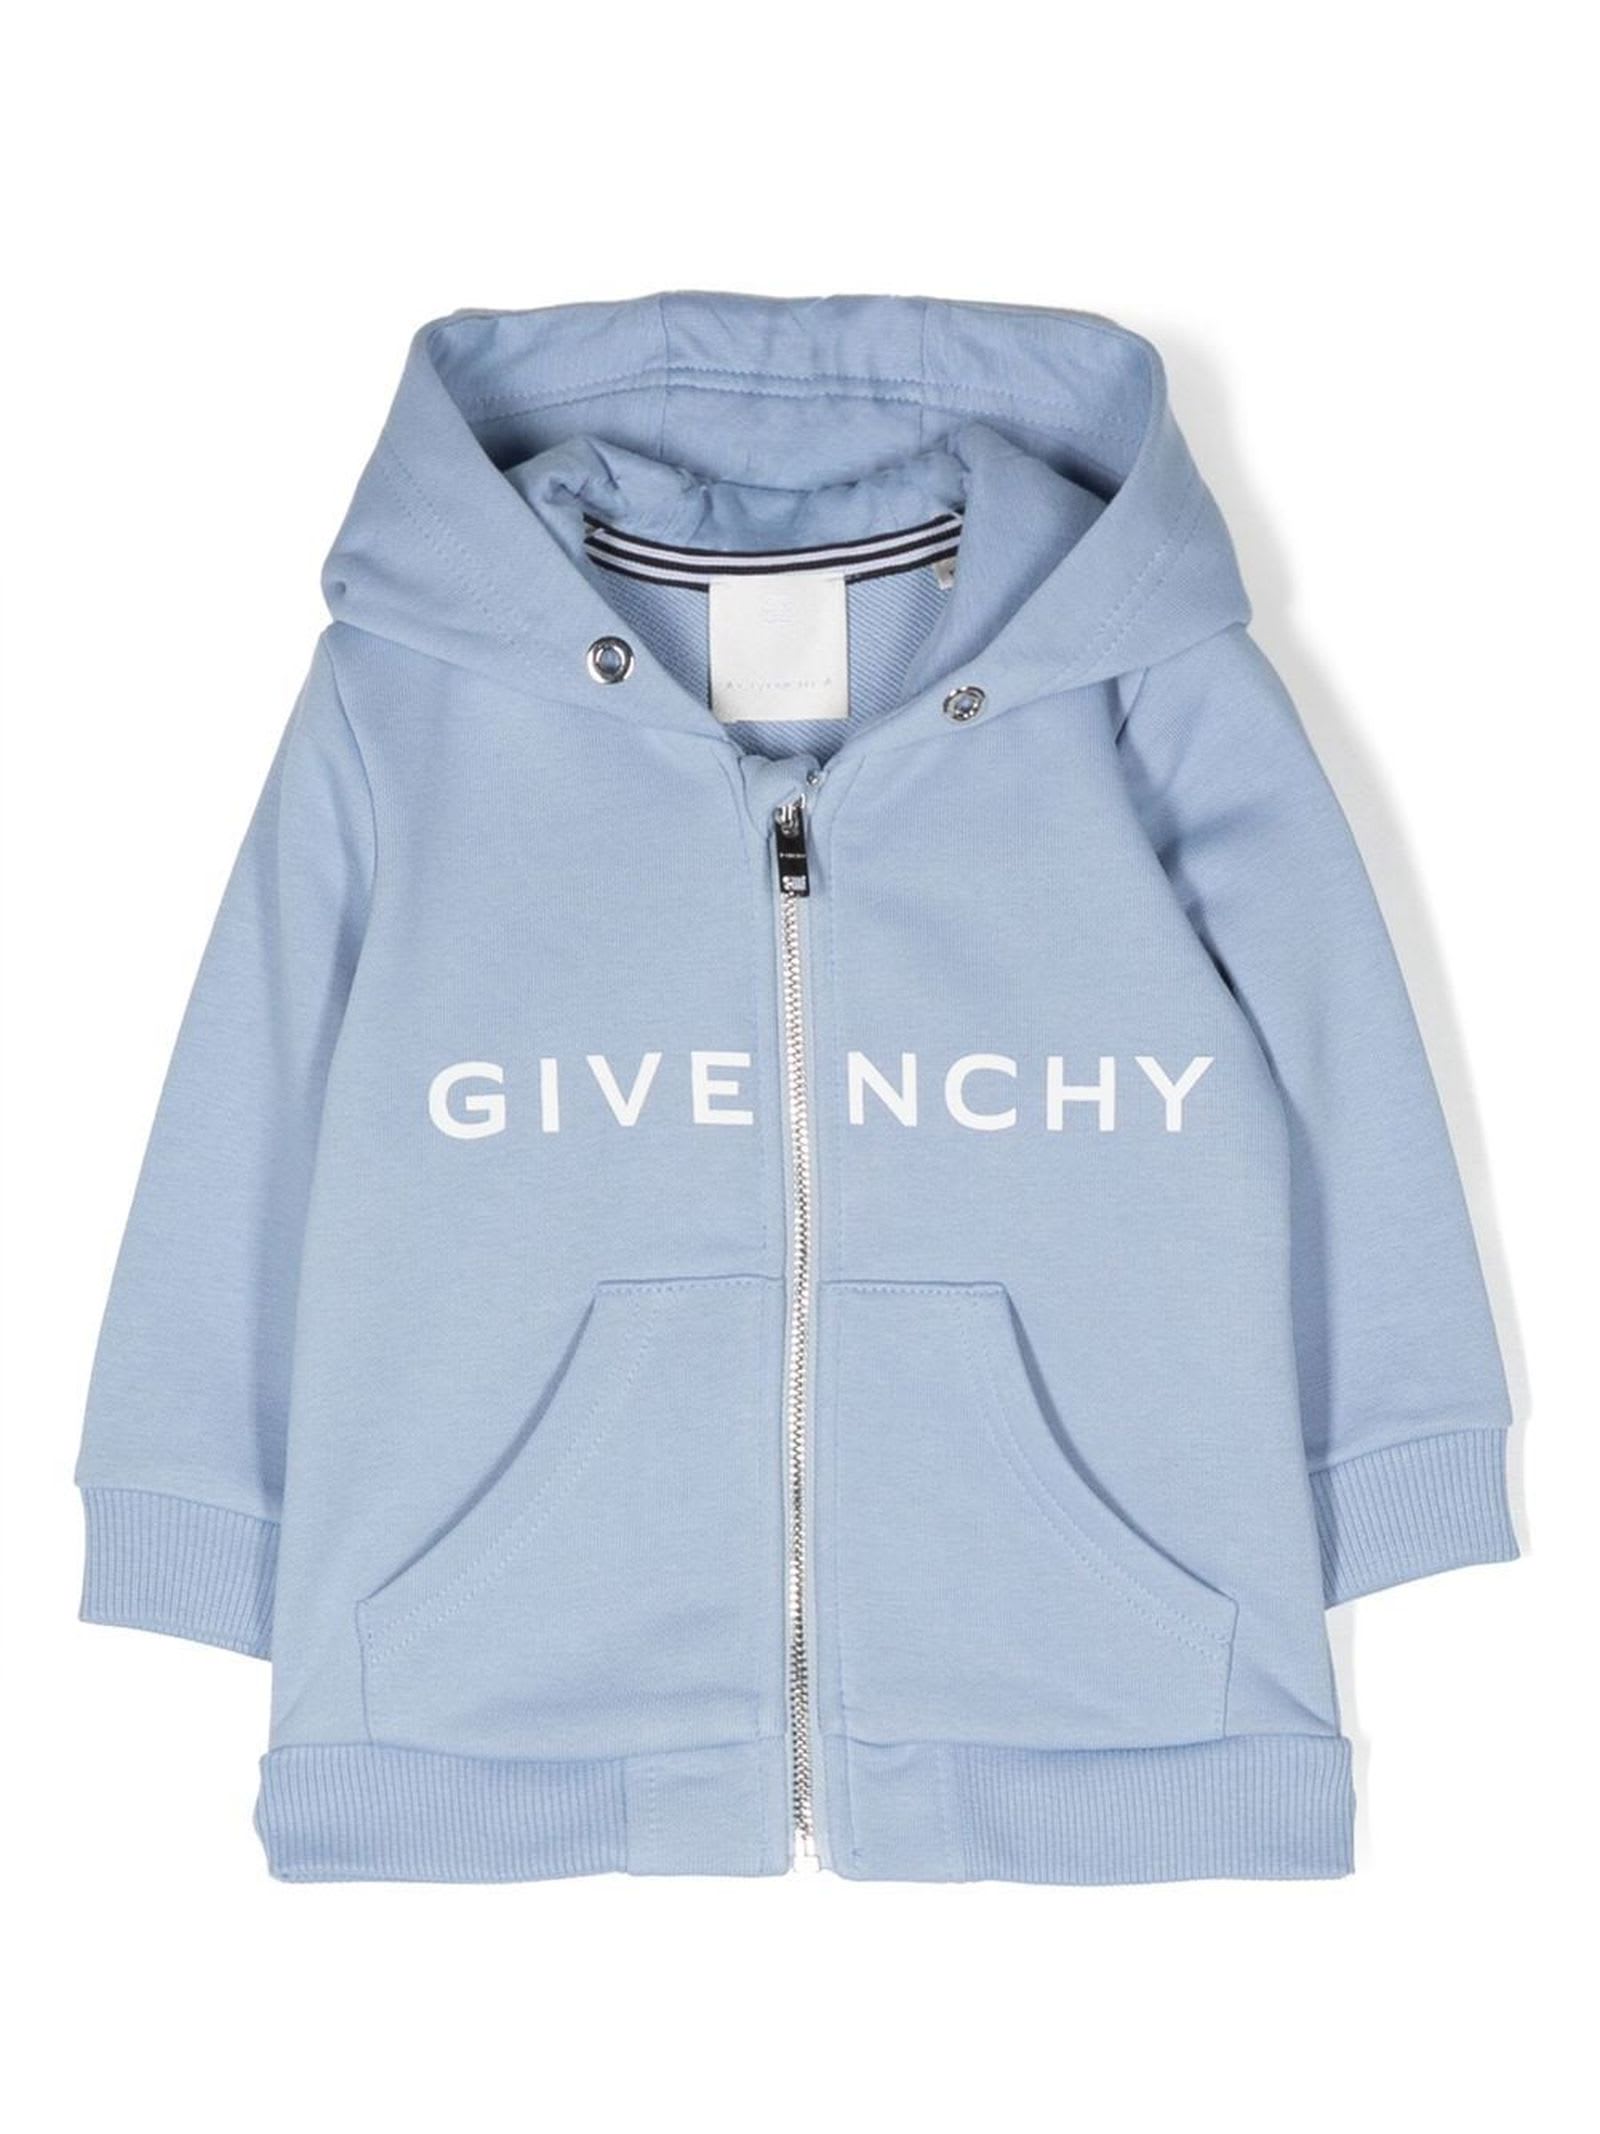 GIVENCHY LIGHT BLUE COTTON HOODIE